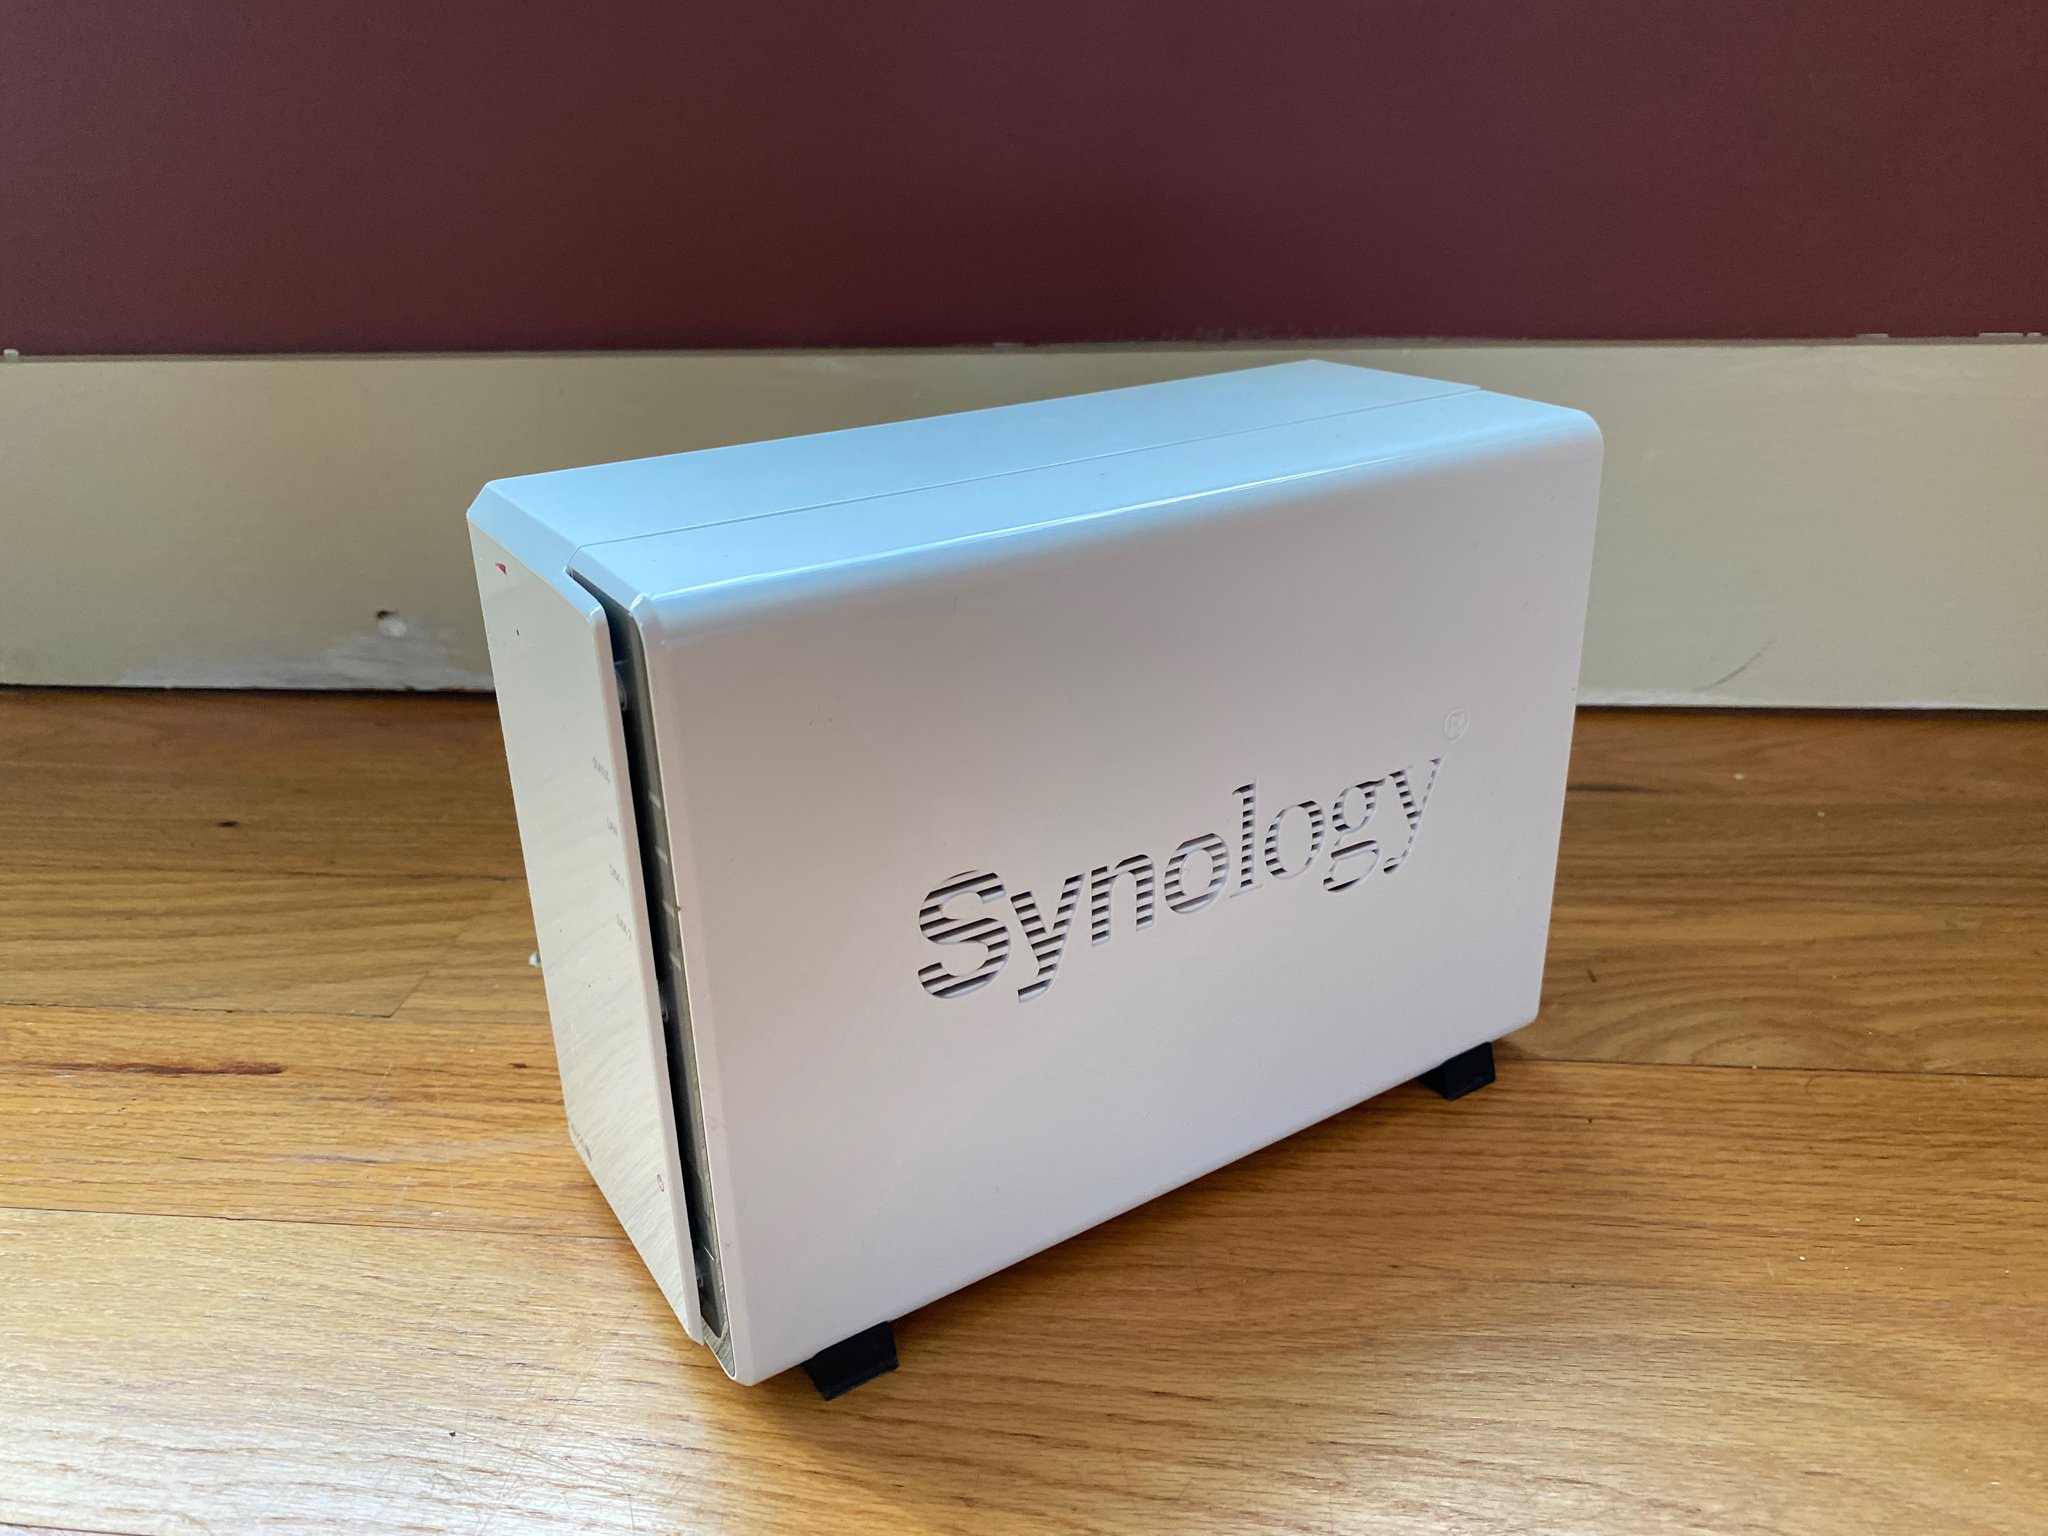 Synology DS220j Review: A solid NAS for everyday people | iMore